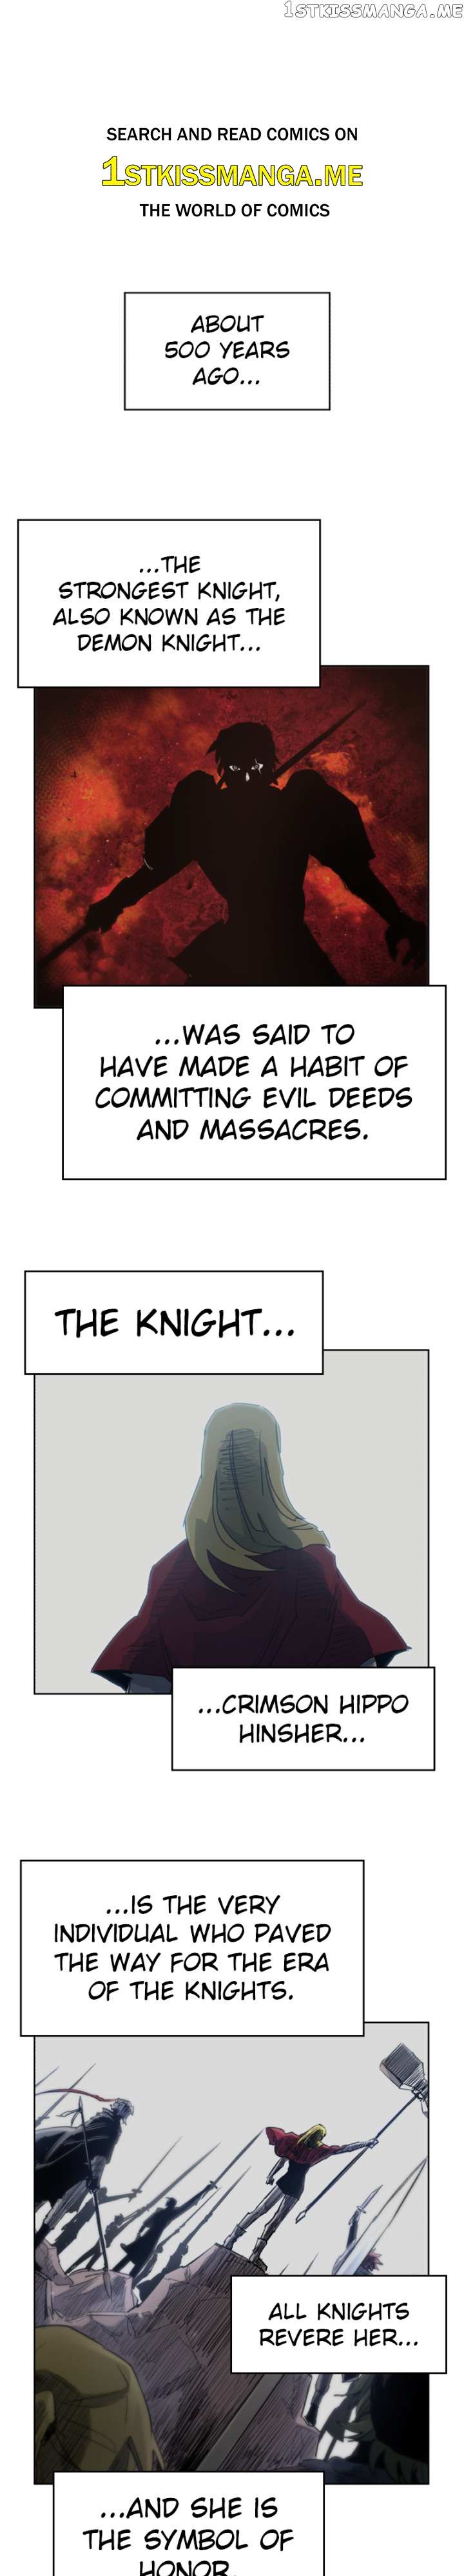 The Knight Of Embers - Page 2